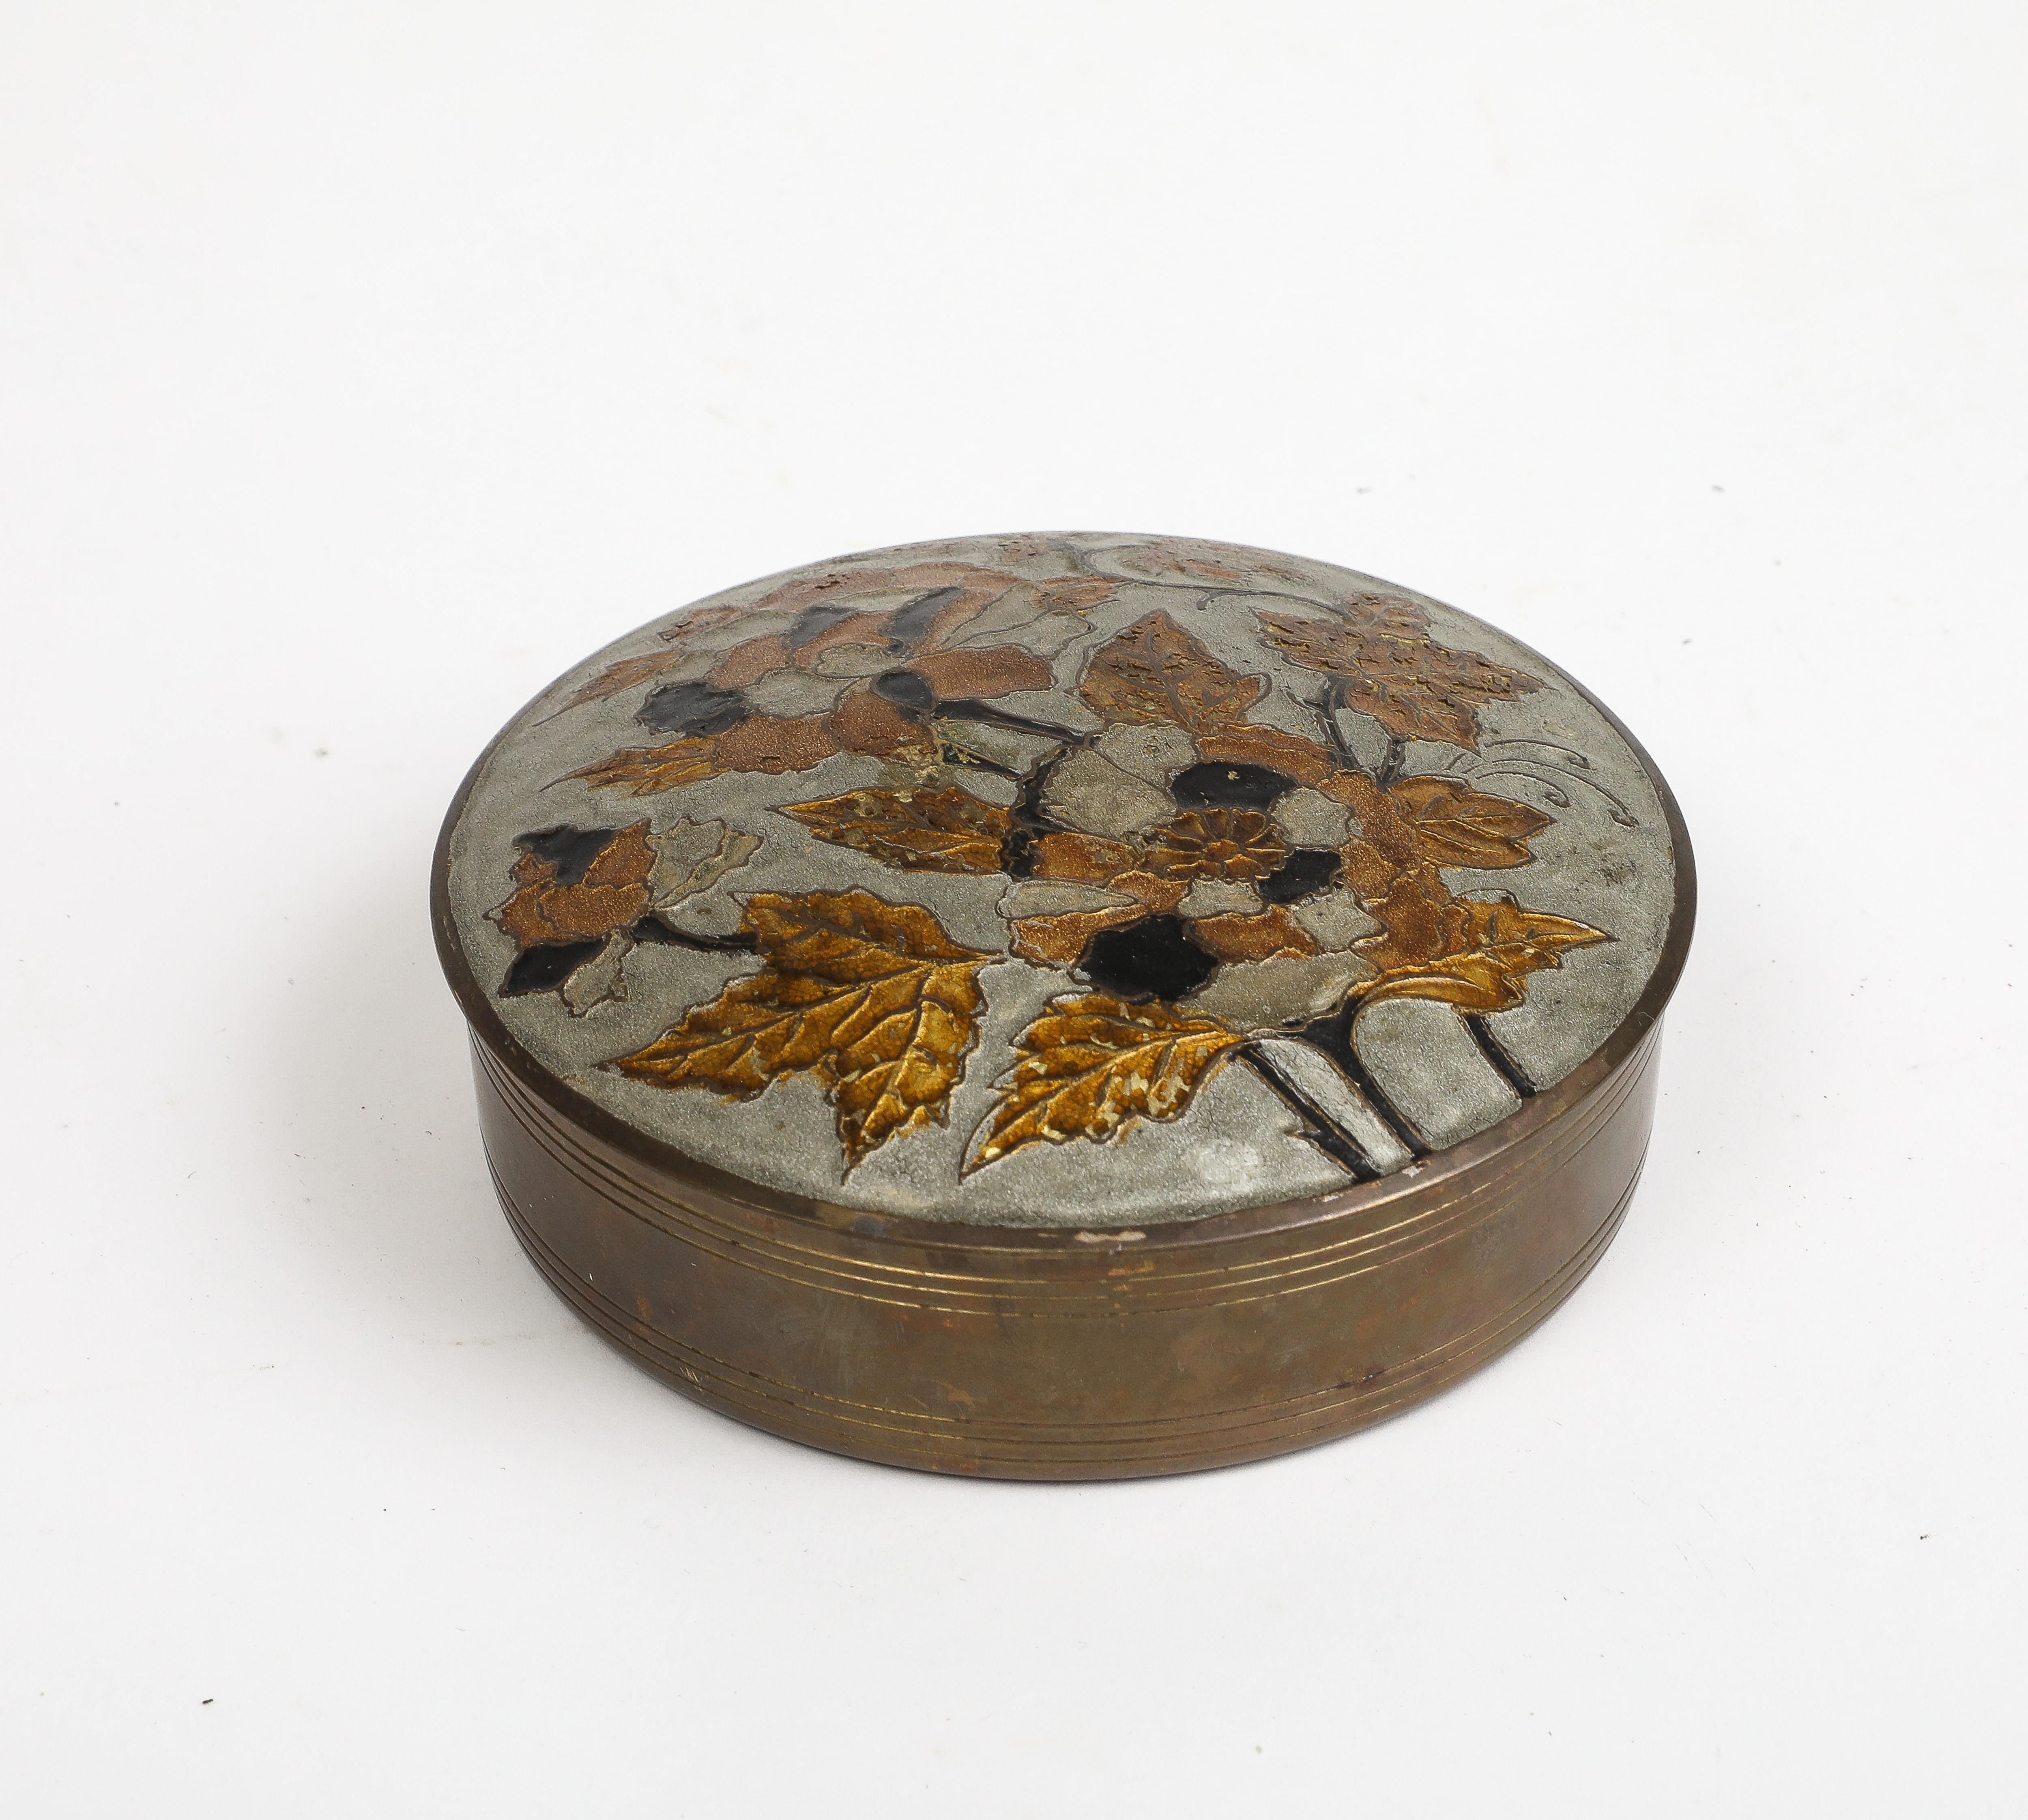 Vintage cloisonné round trinket box, with black and gold flower and foliage decorating the lid. Made in India sticker on bottom. 